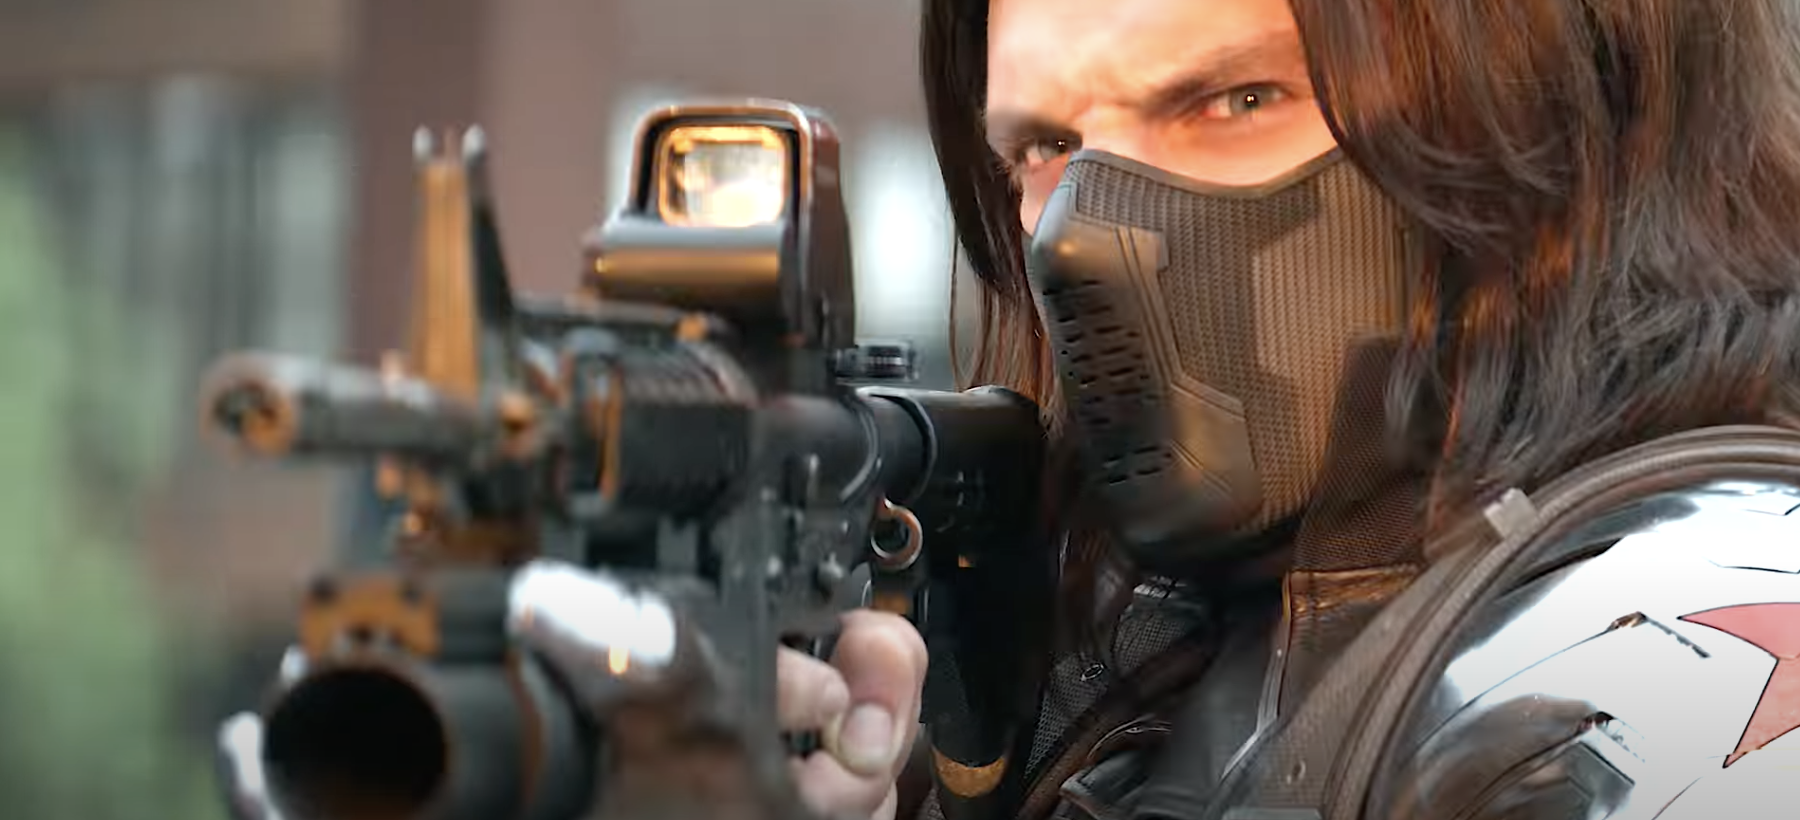 The Winter Soldier holds a gun